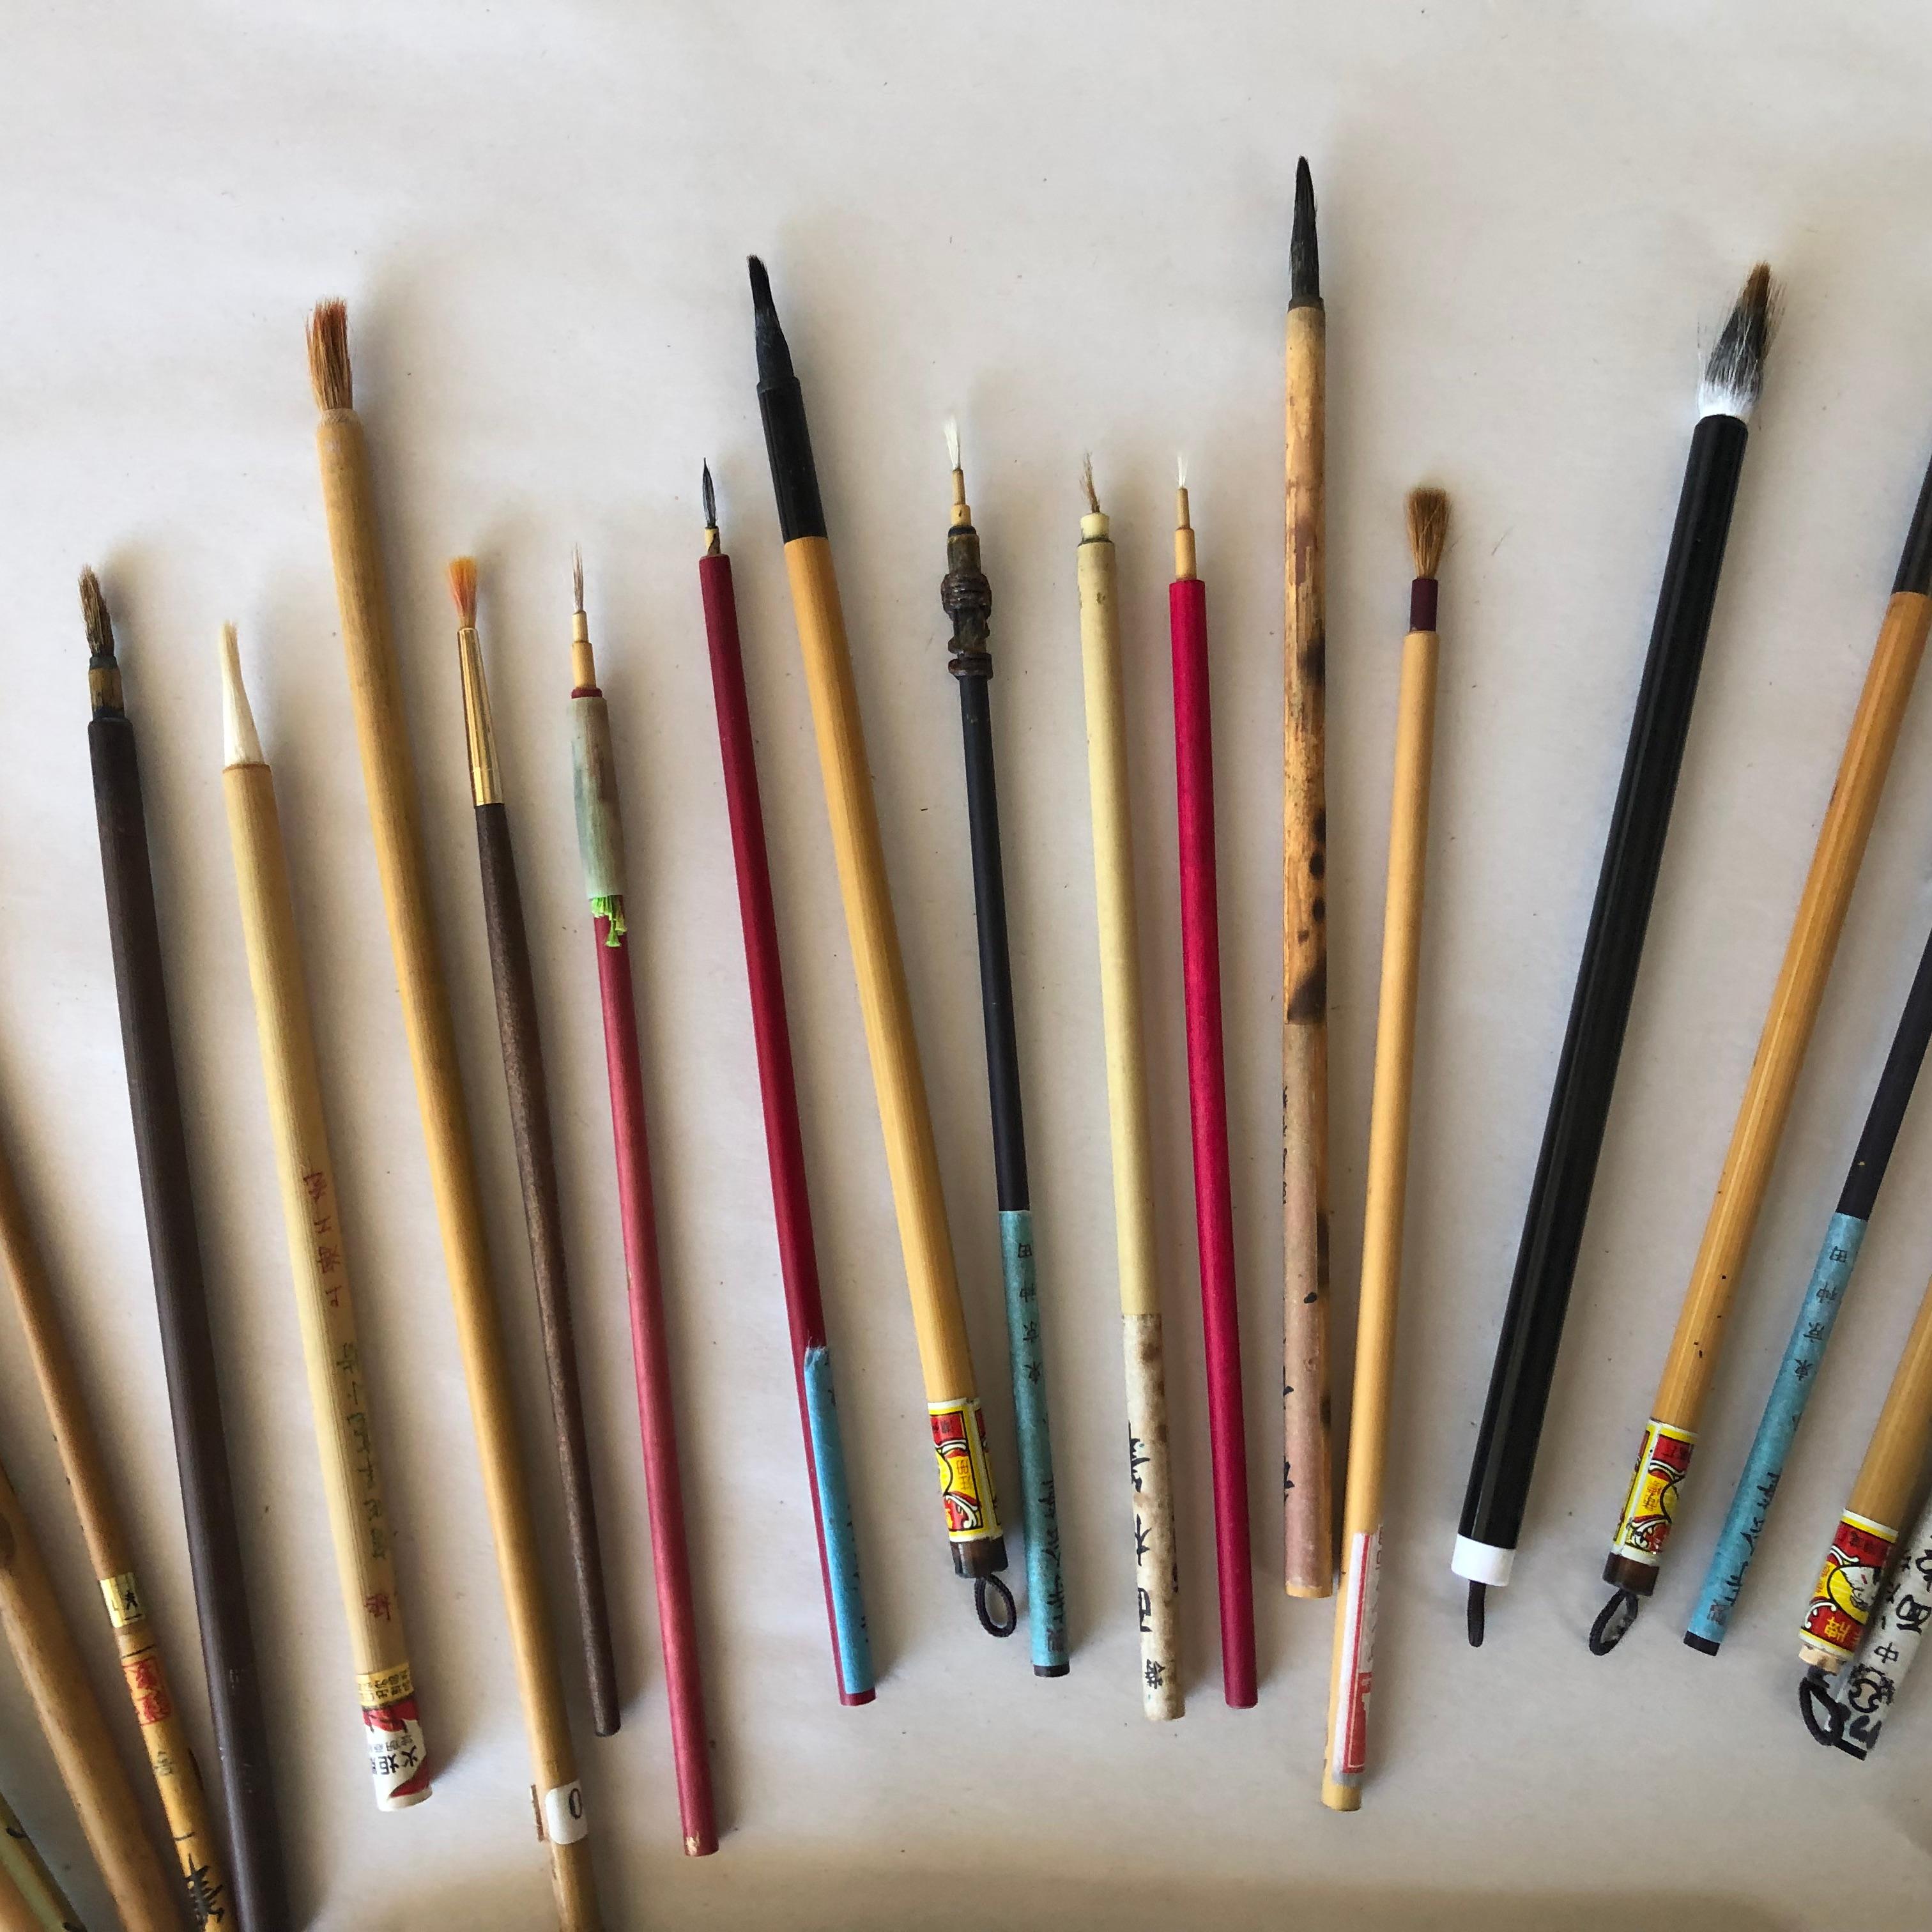 Hand-Crafted Artisan's Cache of 20 Old Chinese Paint Calligraphy Bamboo Brushes